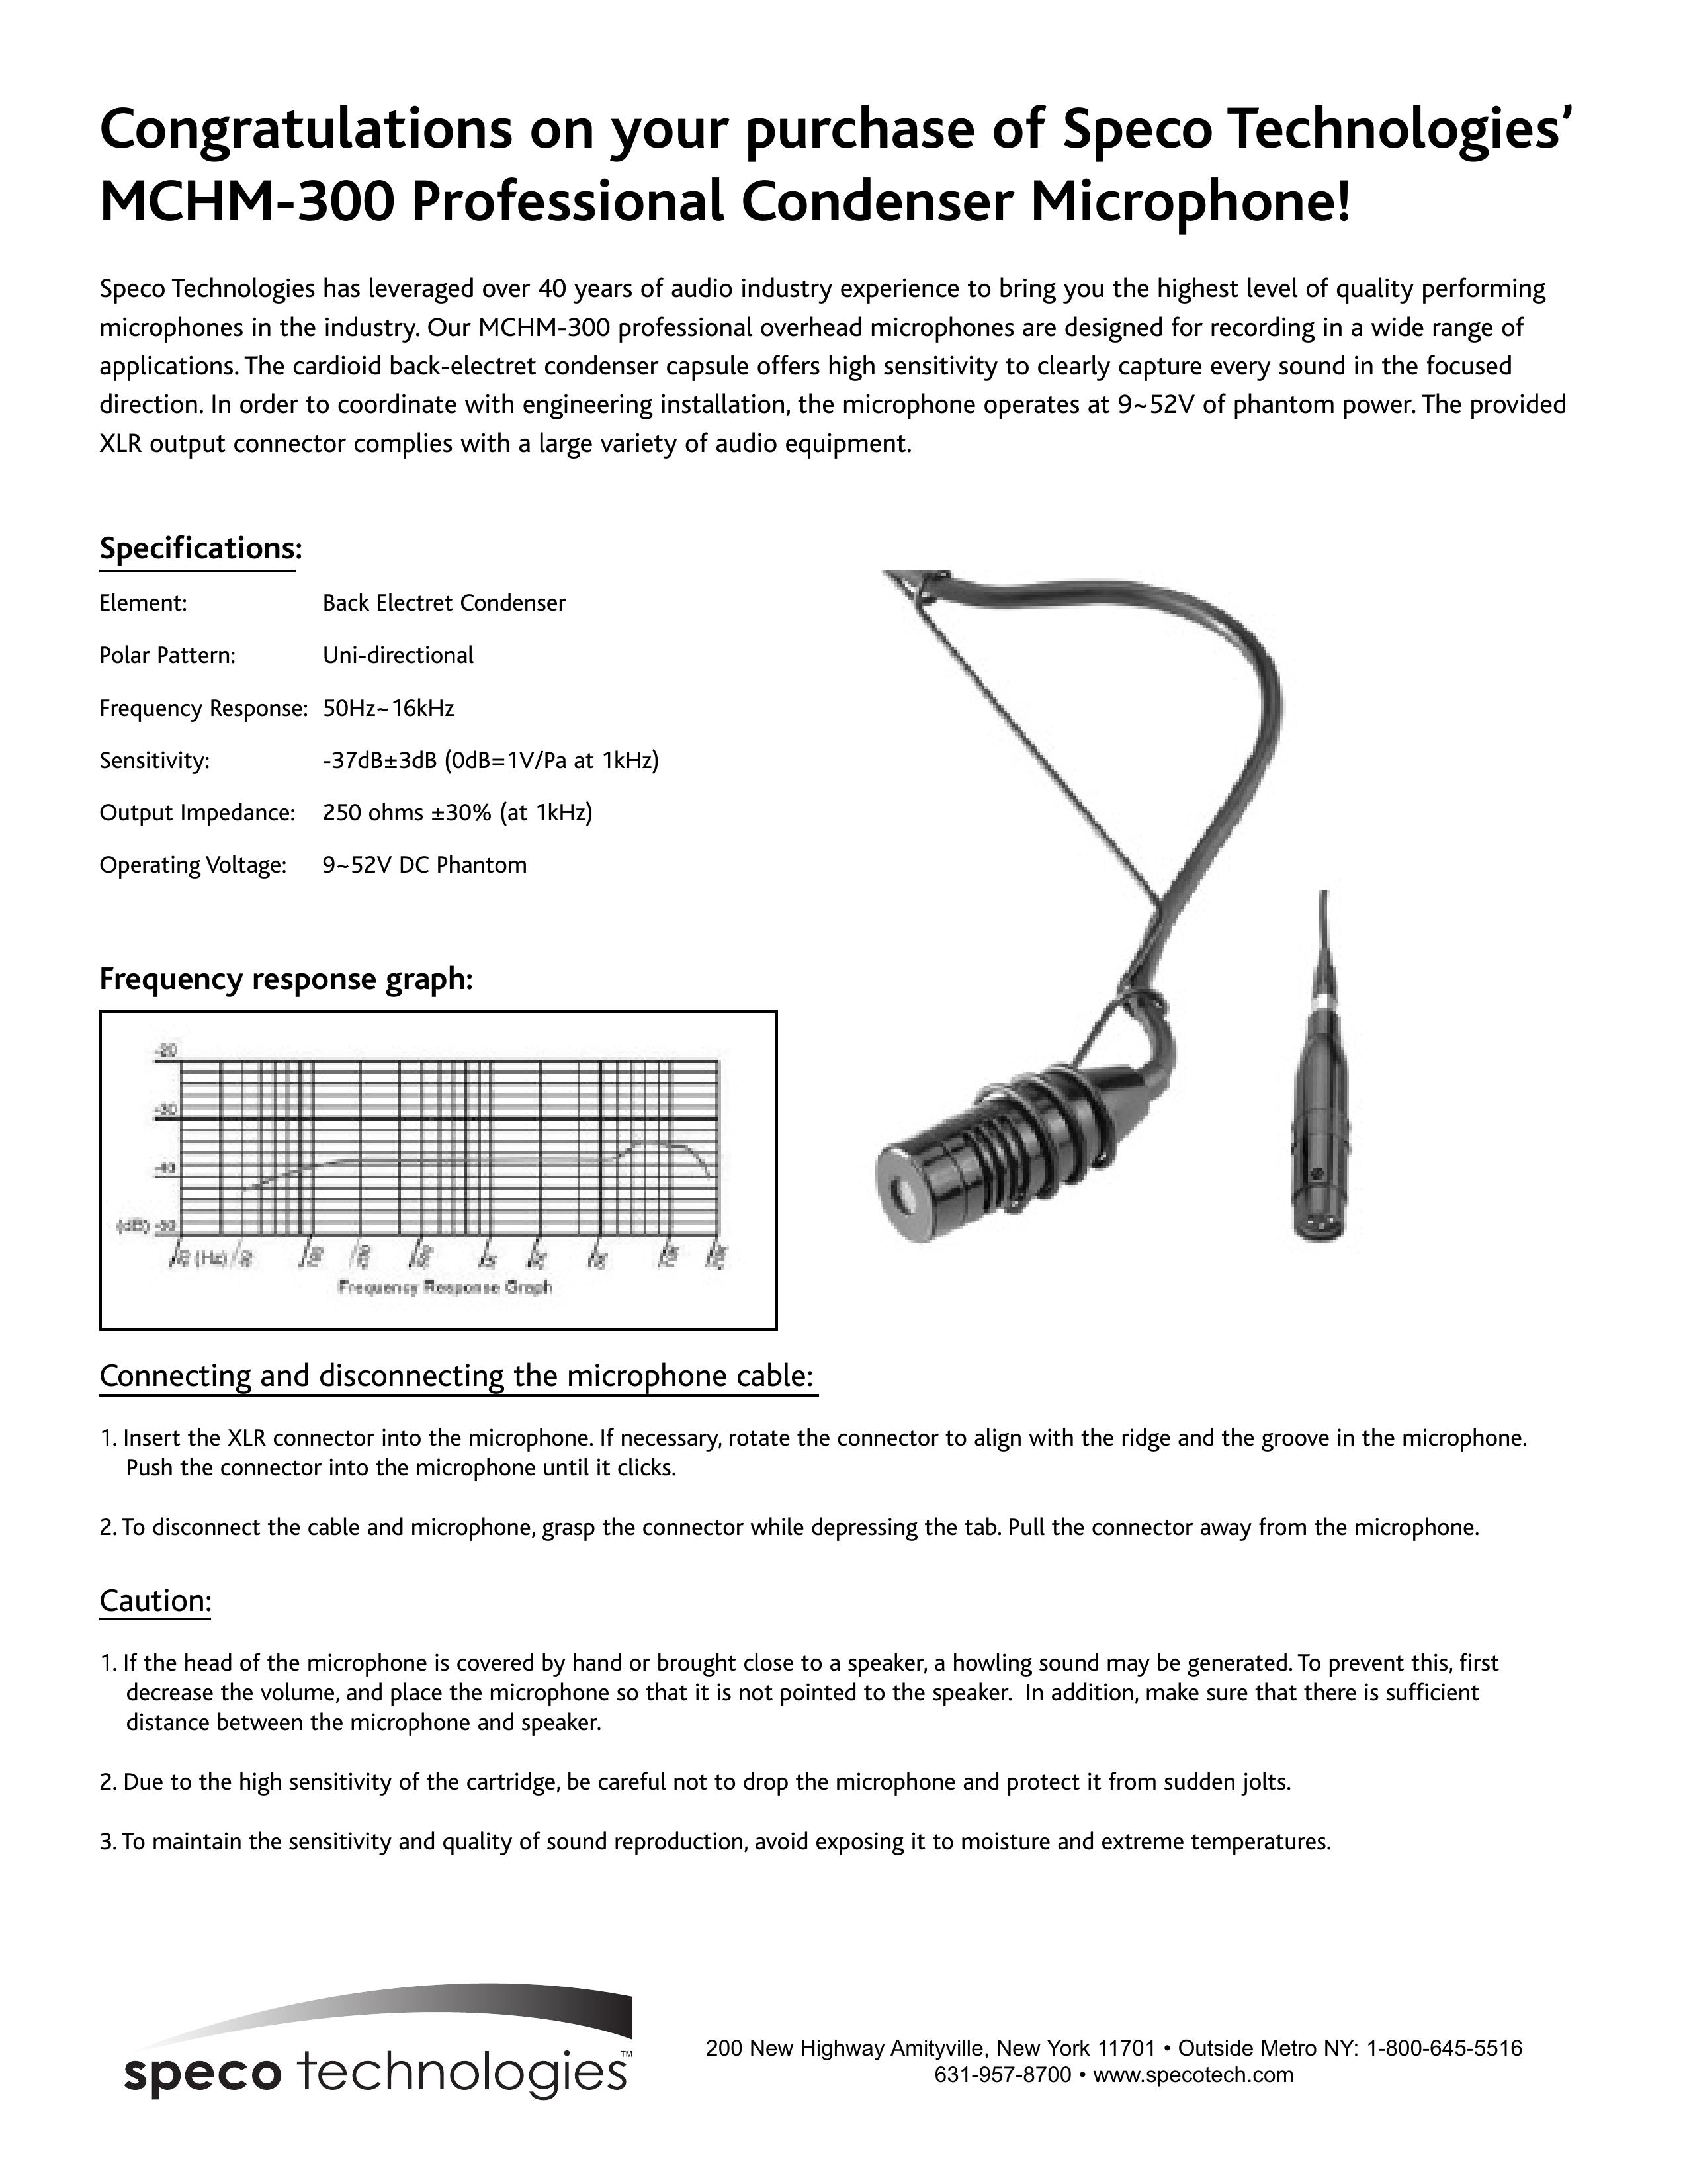 Speco Technologies MCHM-300 Microphone User Manual